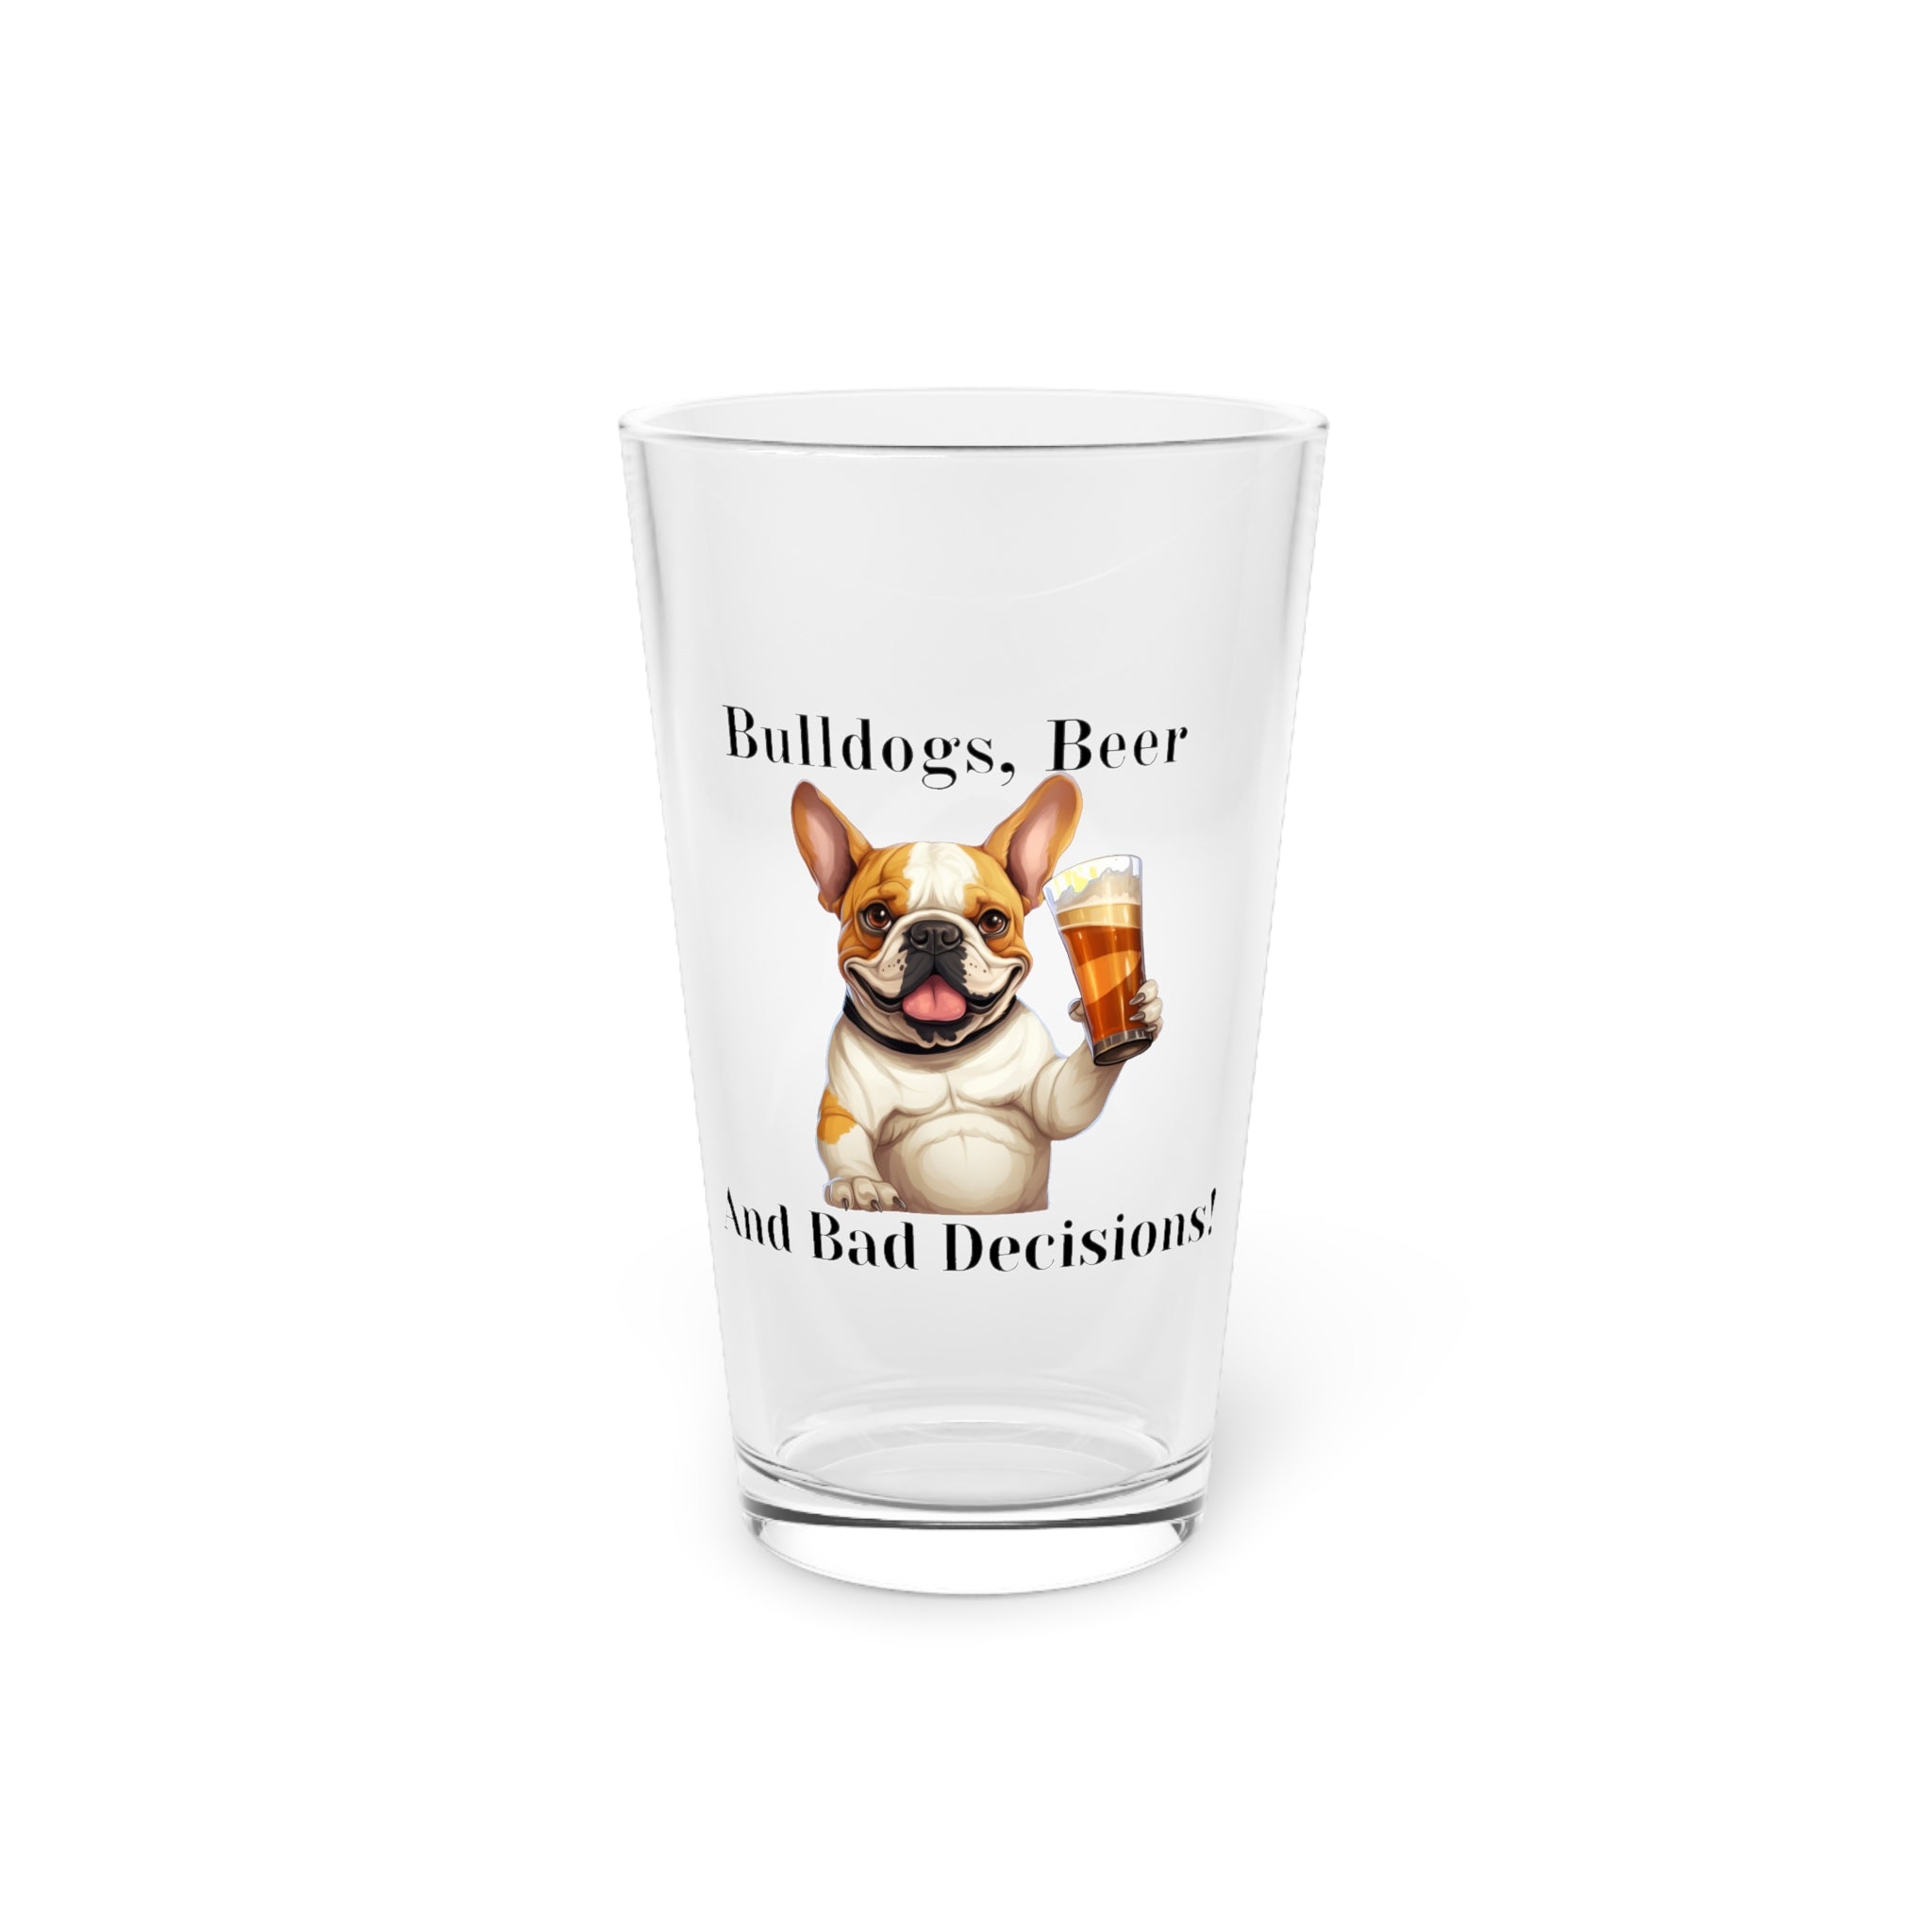 Bulldogs, Beer, and Bad Decisions!" - The Ultimate Pint Glass by Tipsy Bully (French/white)